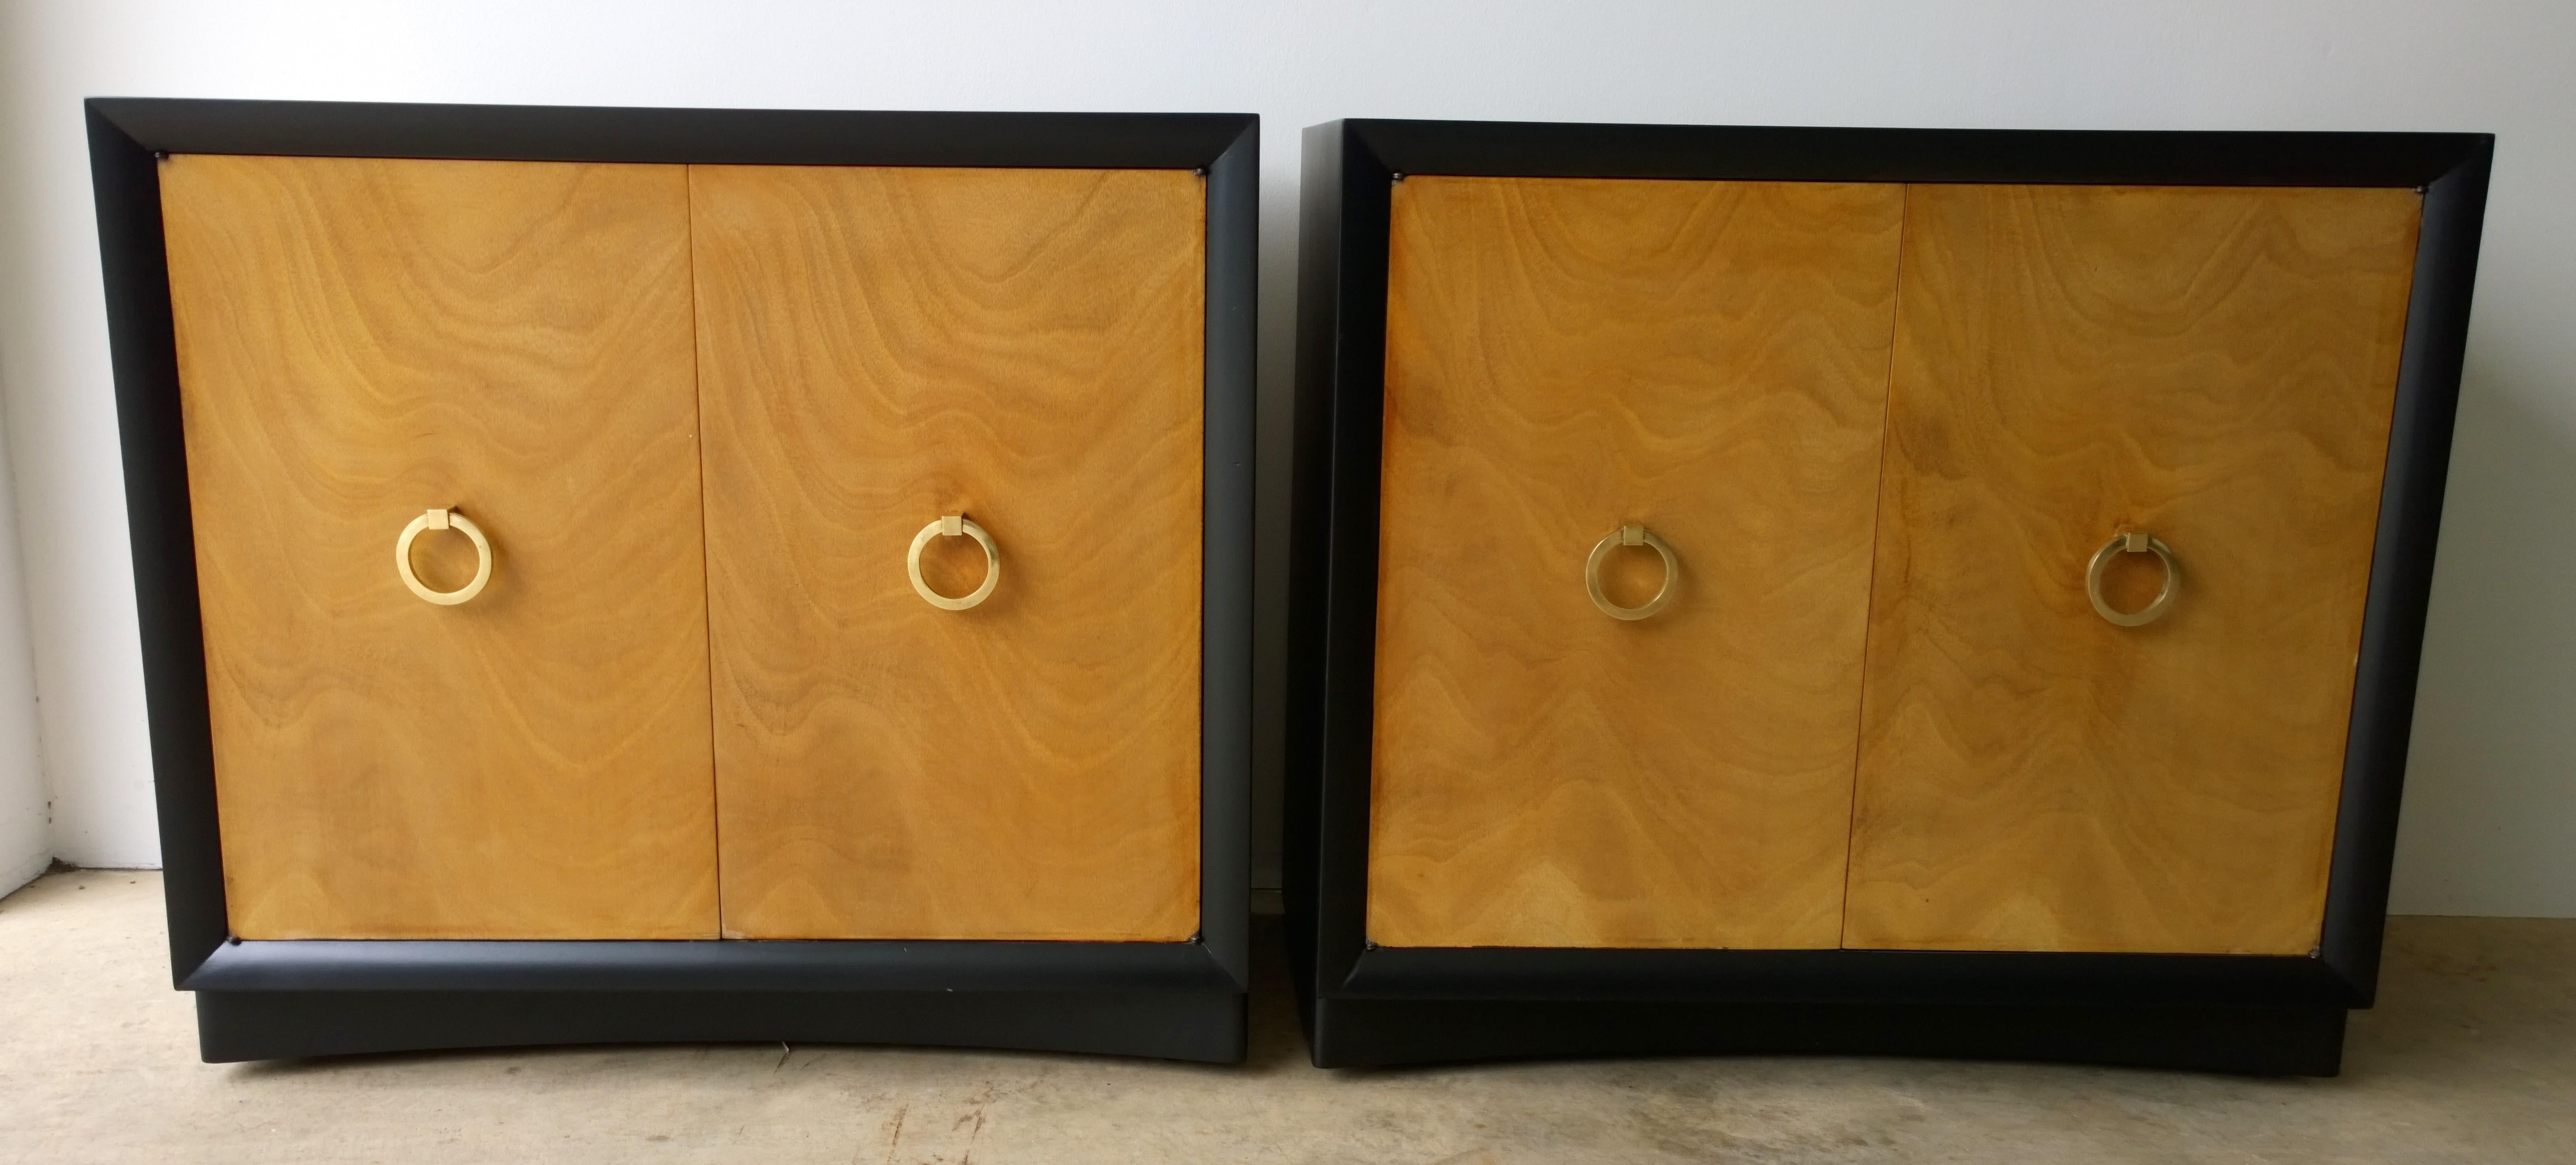 American Pair of Black Refinished Wood Frame & Burl Wood Doors with Brass Pulls Cabinets For Sale